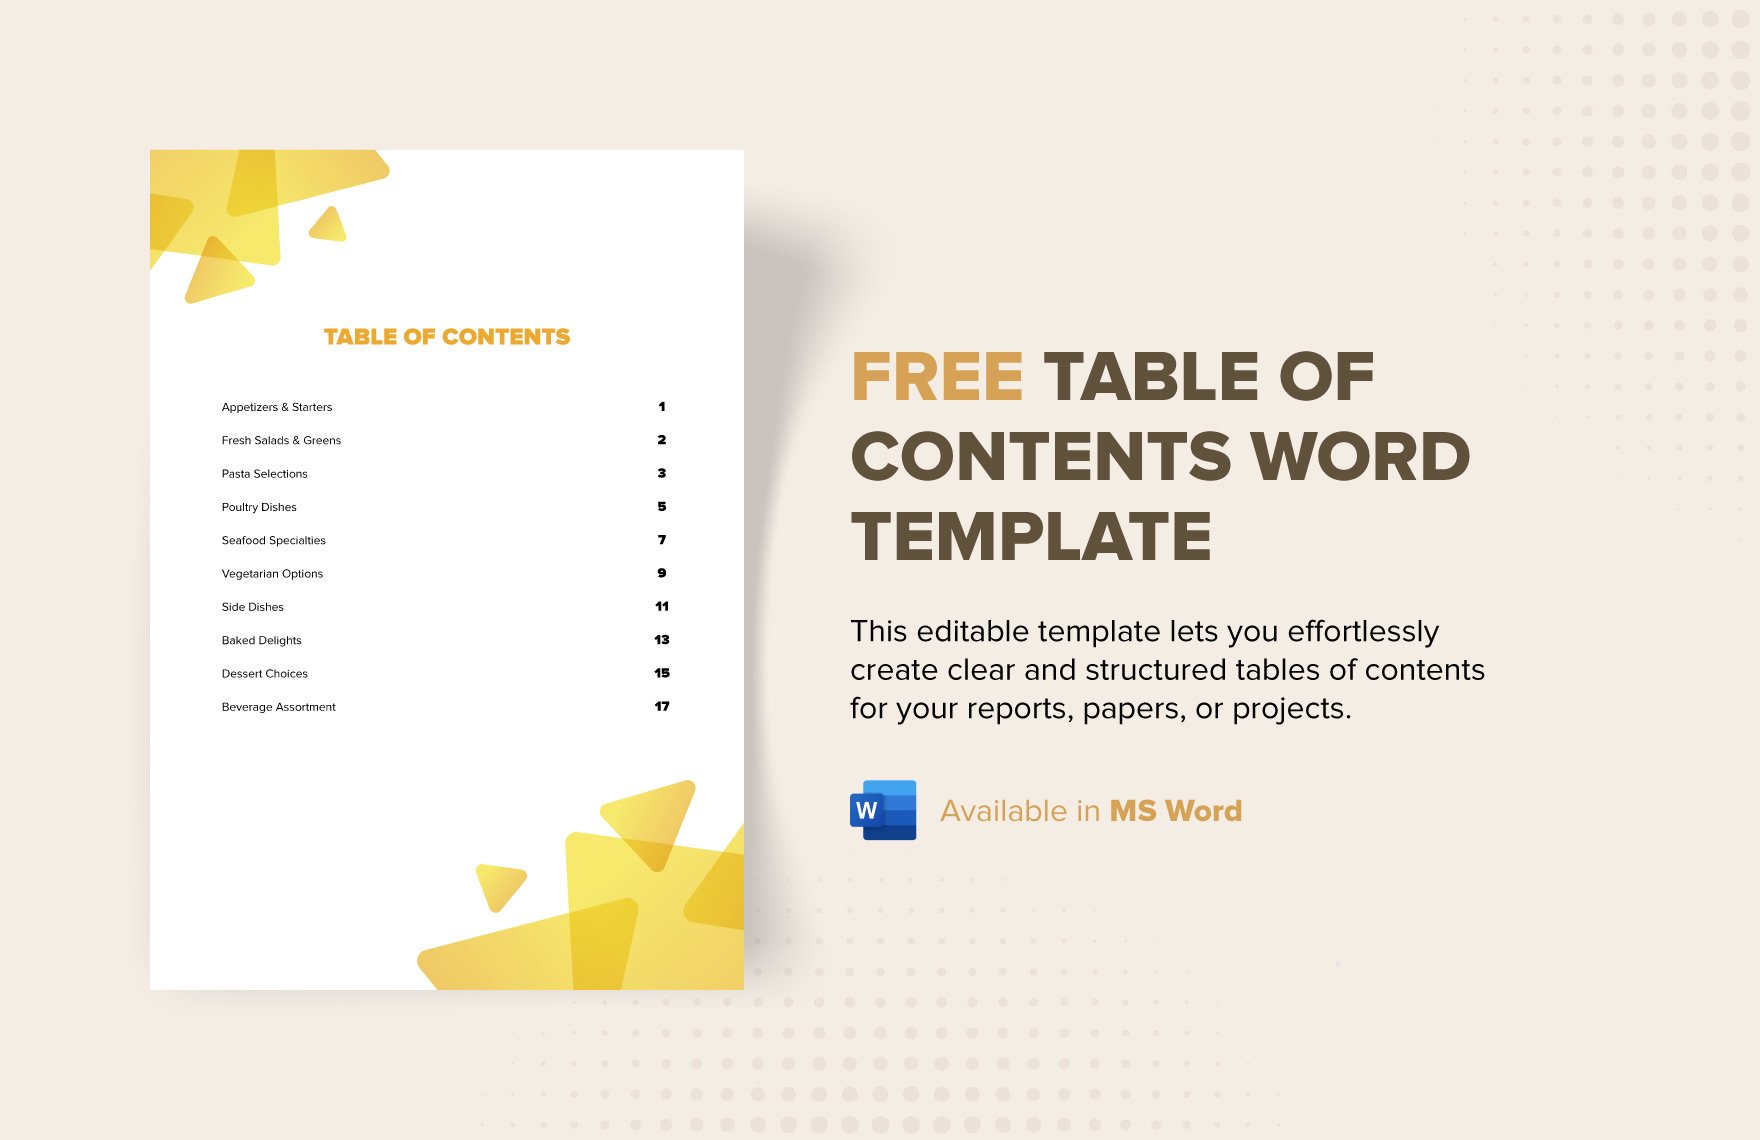 Table of Contents Word Template